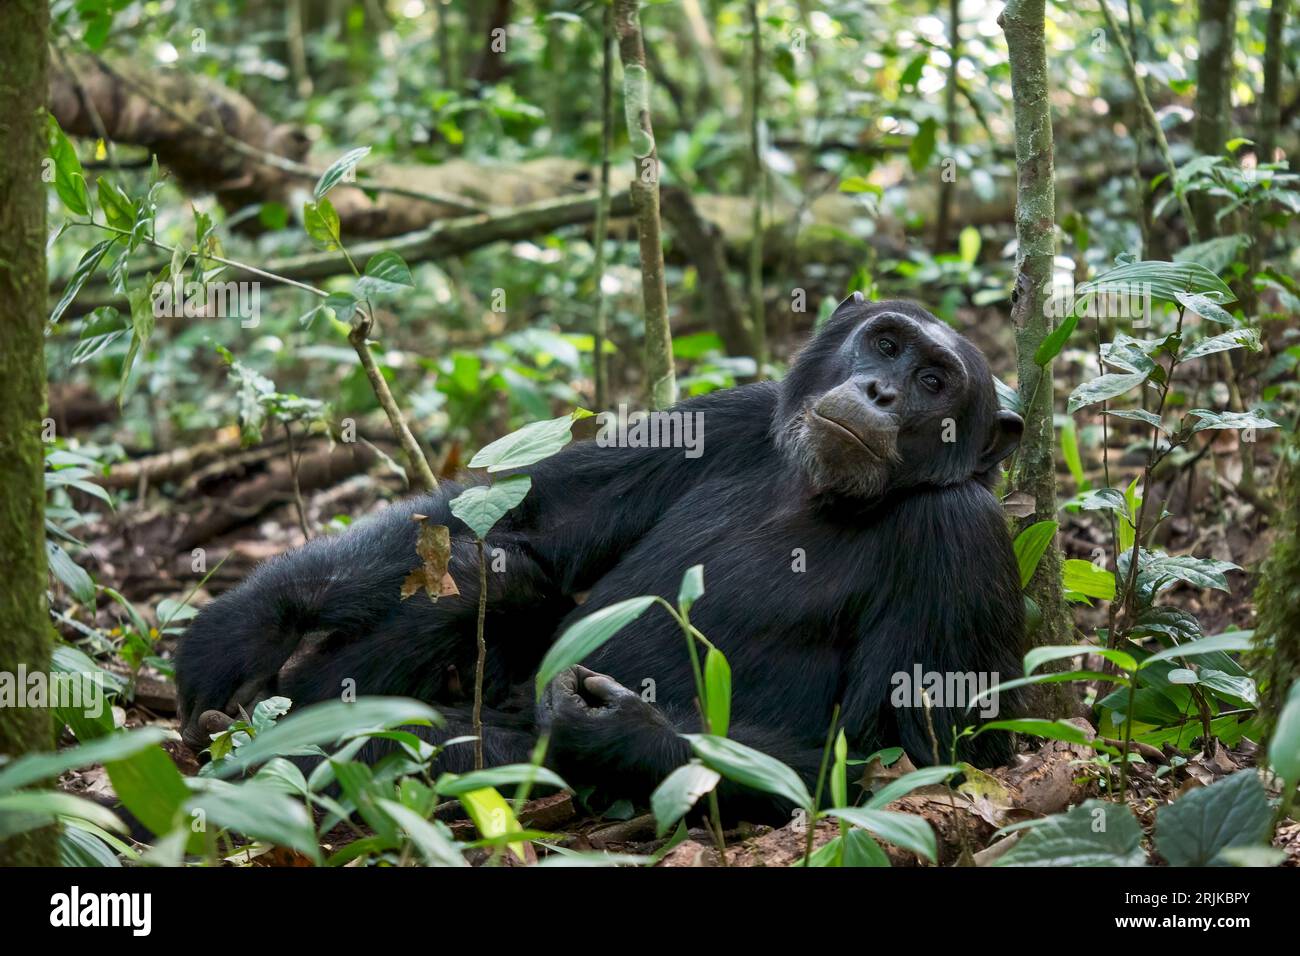 An older wild male chimpanzee (Pan troglodytes) relaxes on the ground in his natural forest habitat in Kibale National Park, Uganda. Stock Photo